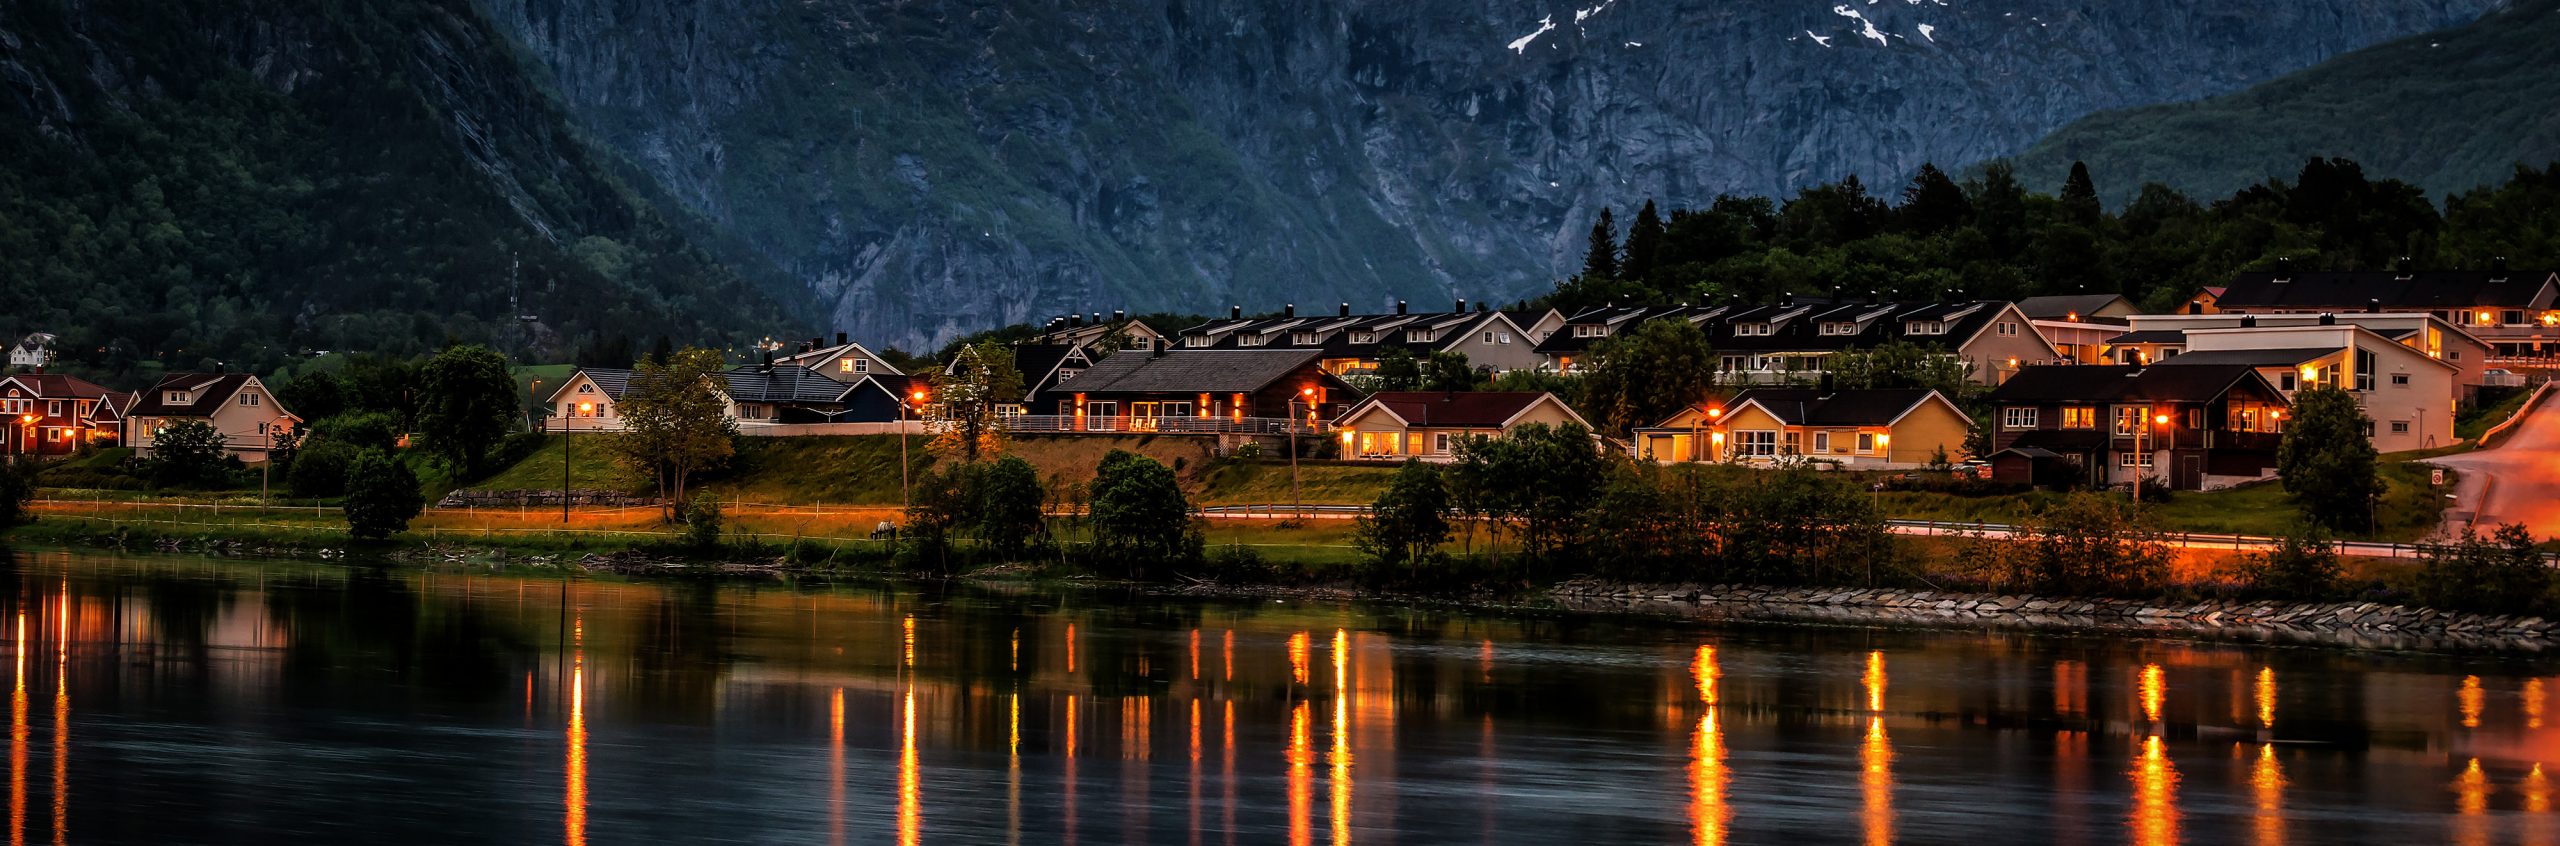 Village under mountains in Norway after sunset